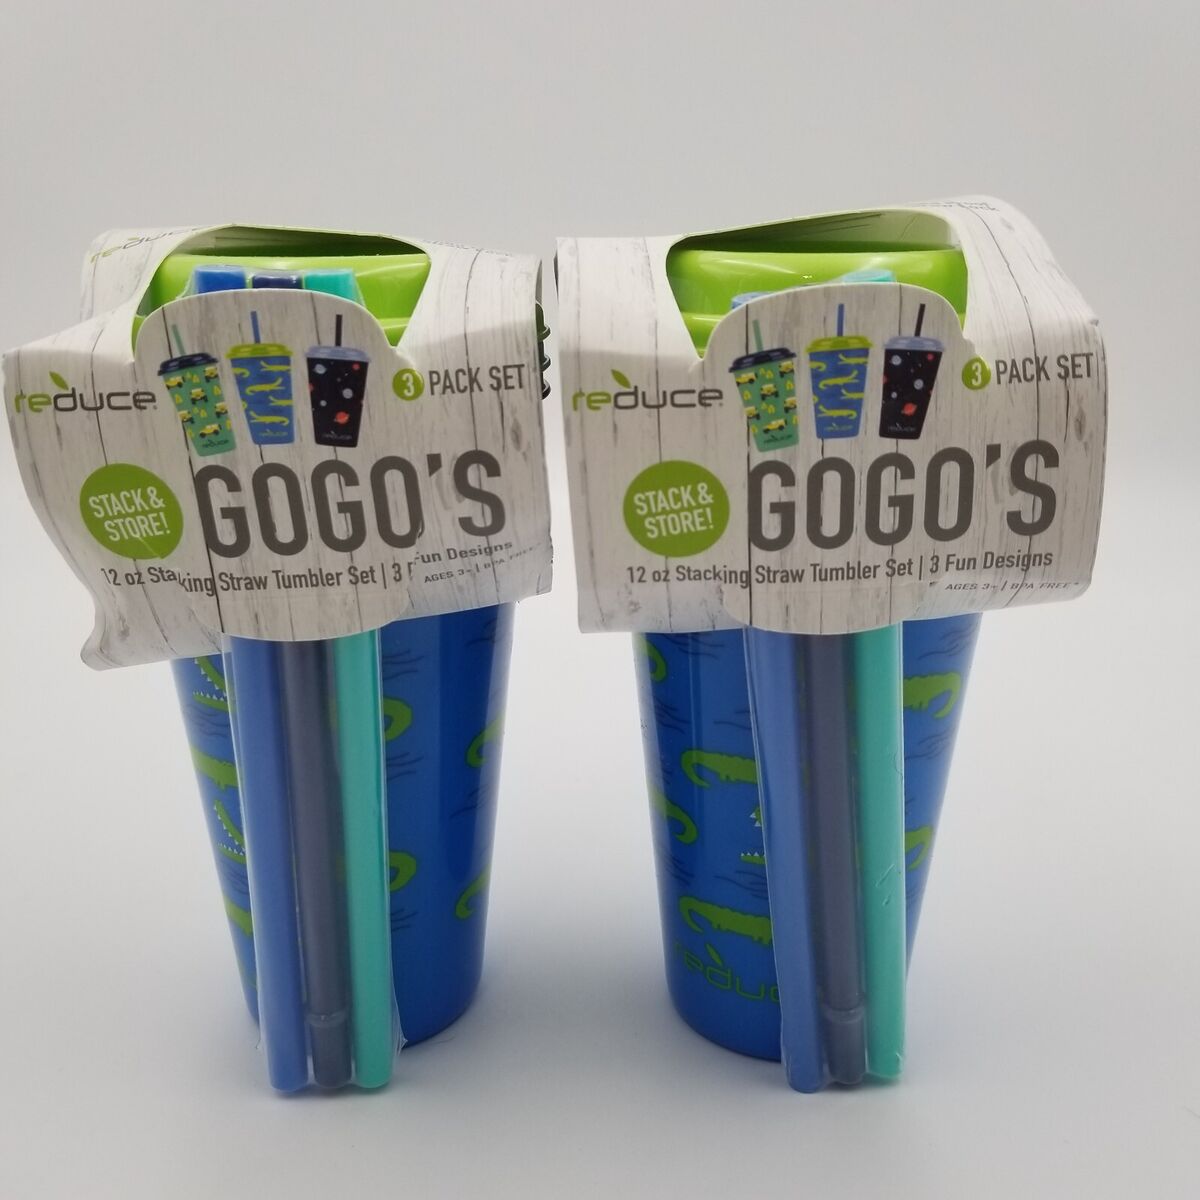 2X Reduce GoGo's Straw Tumblers 12 oz (3 Pack Sets) Lot of 2